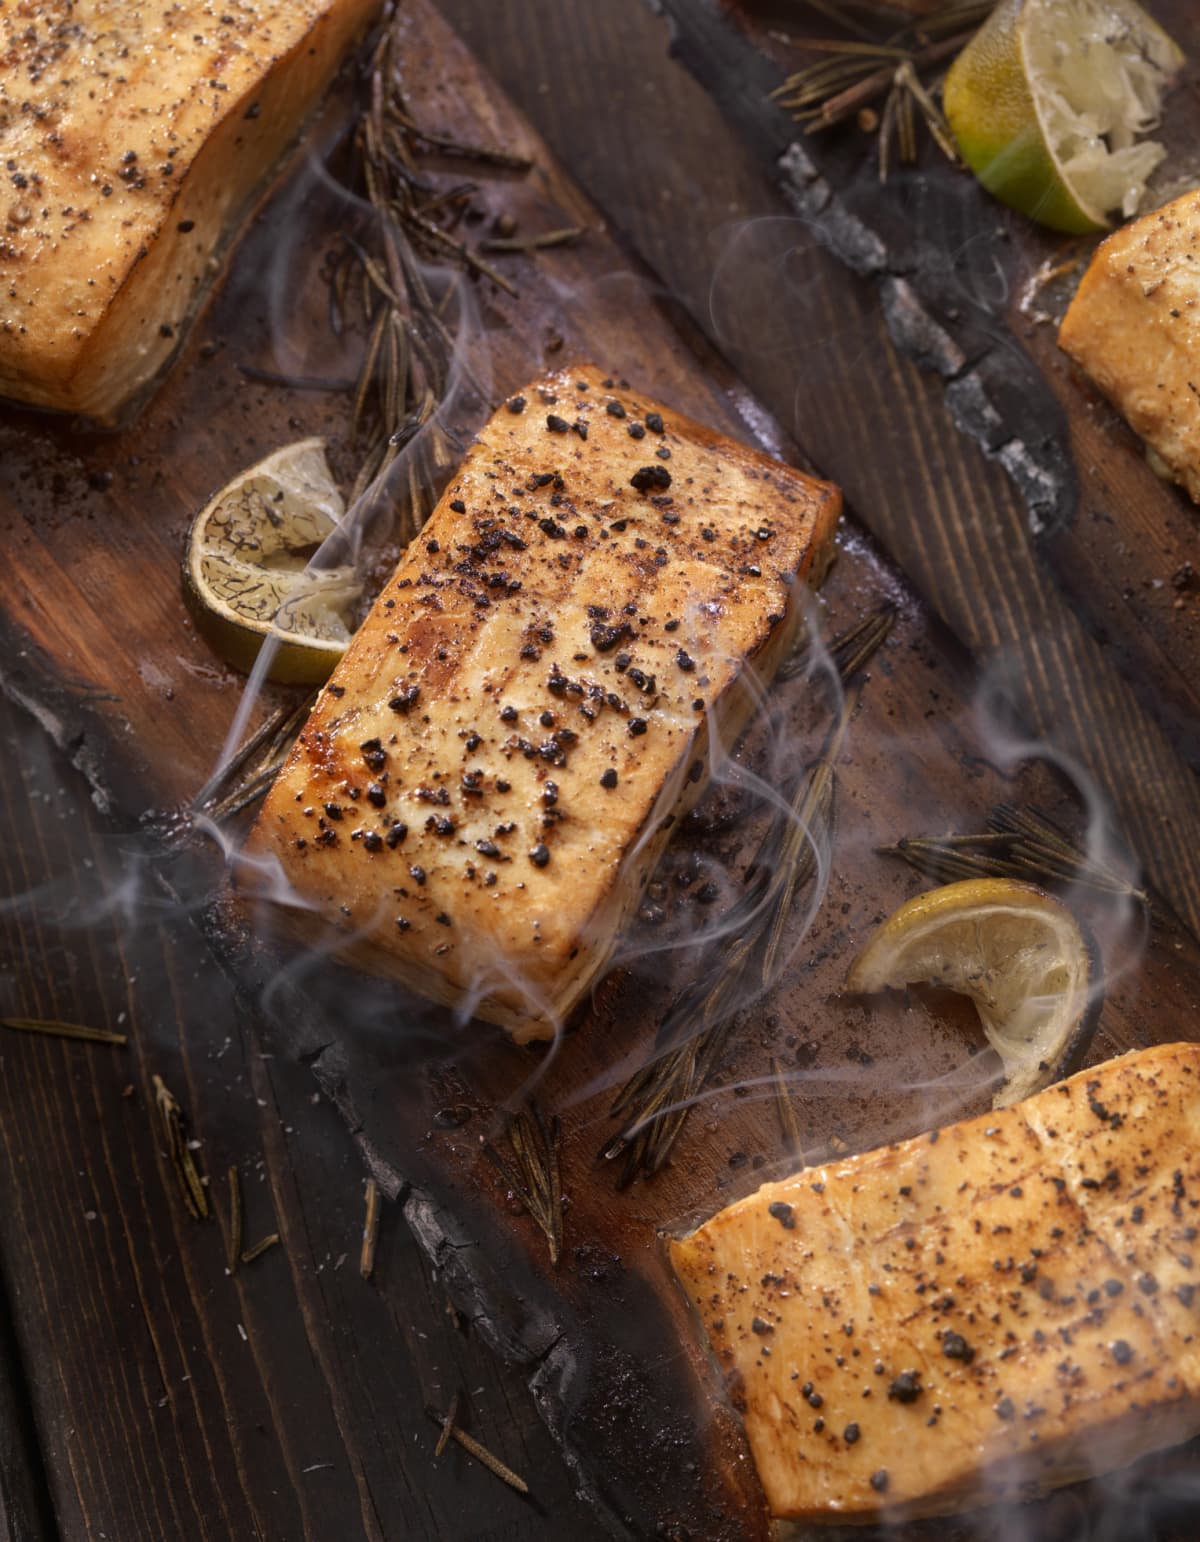 Cedar Plank Salmon fillets hot off the BBQ -Photographed on Hasselblad H3D2-39mb Camera